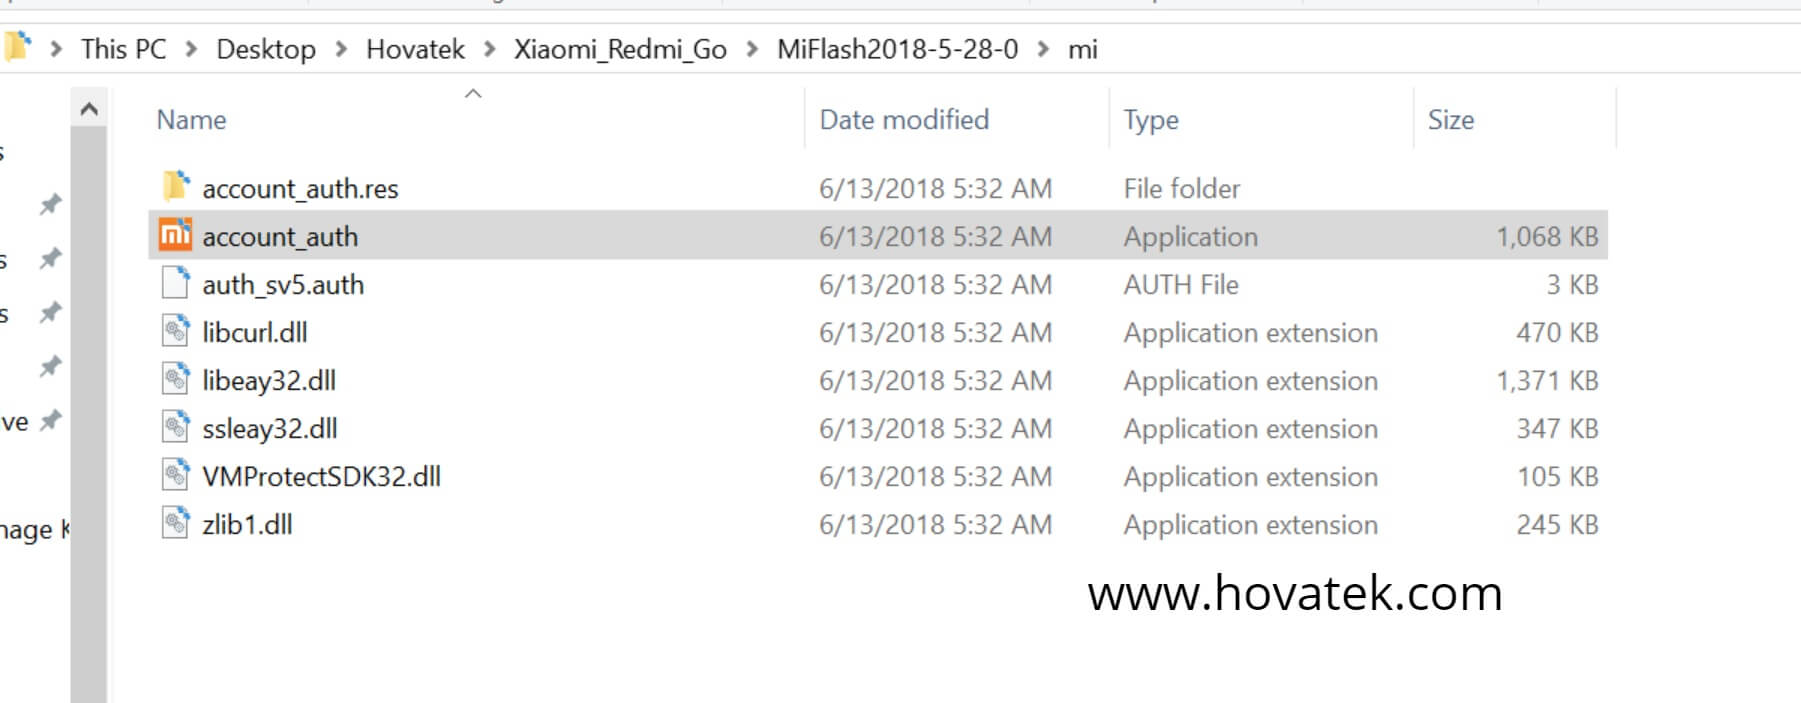 [Image: How-to-bind-a-Mi-account-to-a-PC-in-Mi-Flash-Tool-1.jpg]